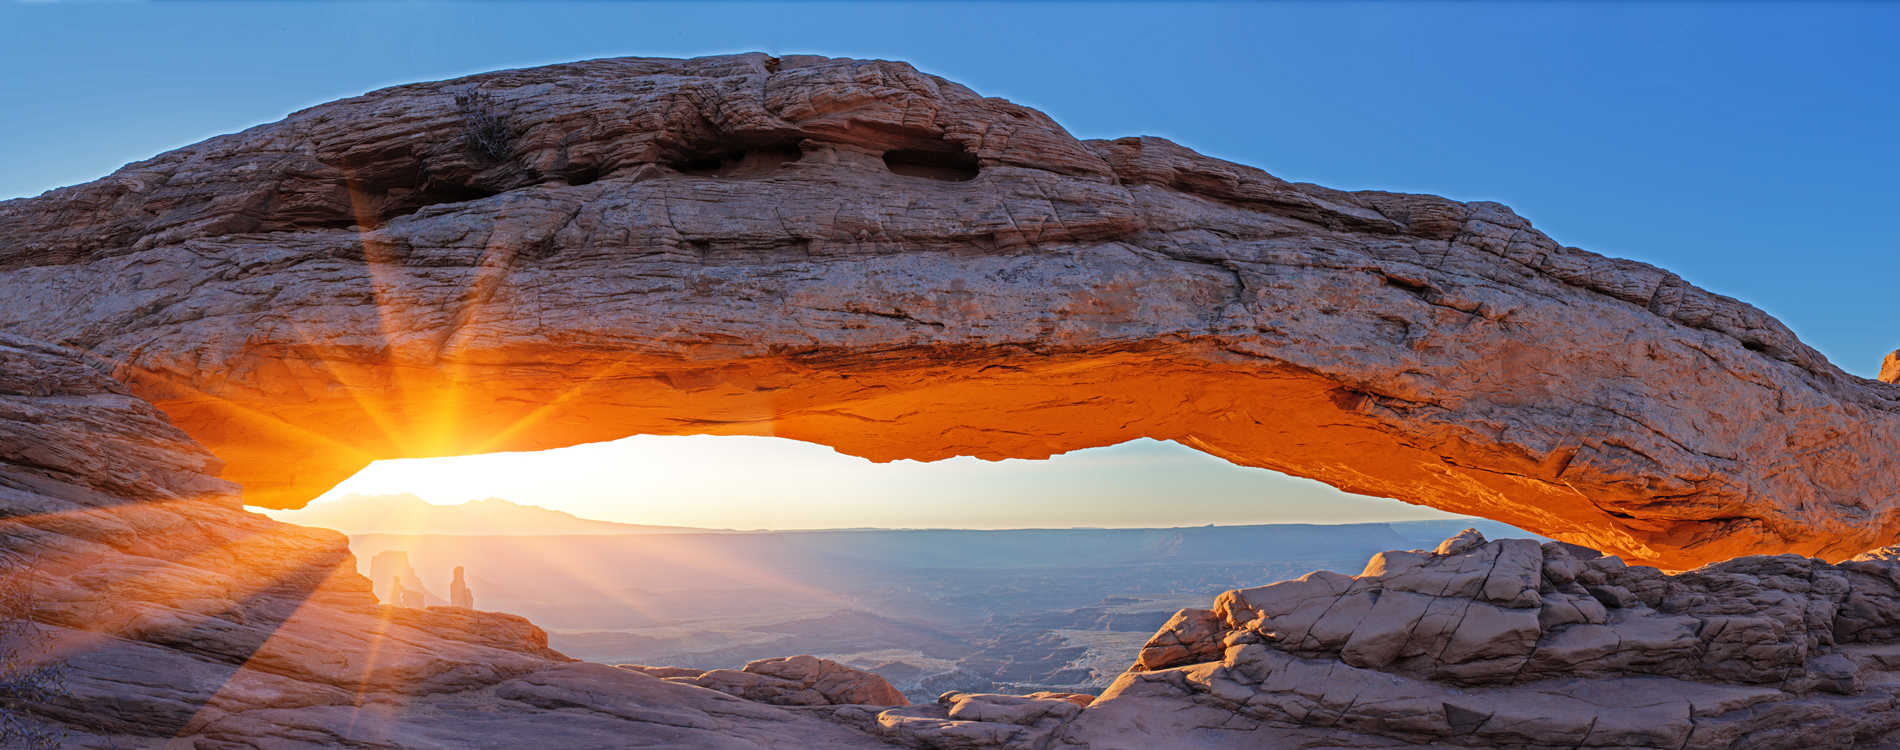 Moab, UT - Mesa Arch in Canyonlands National Park